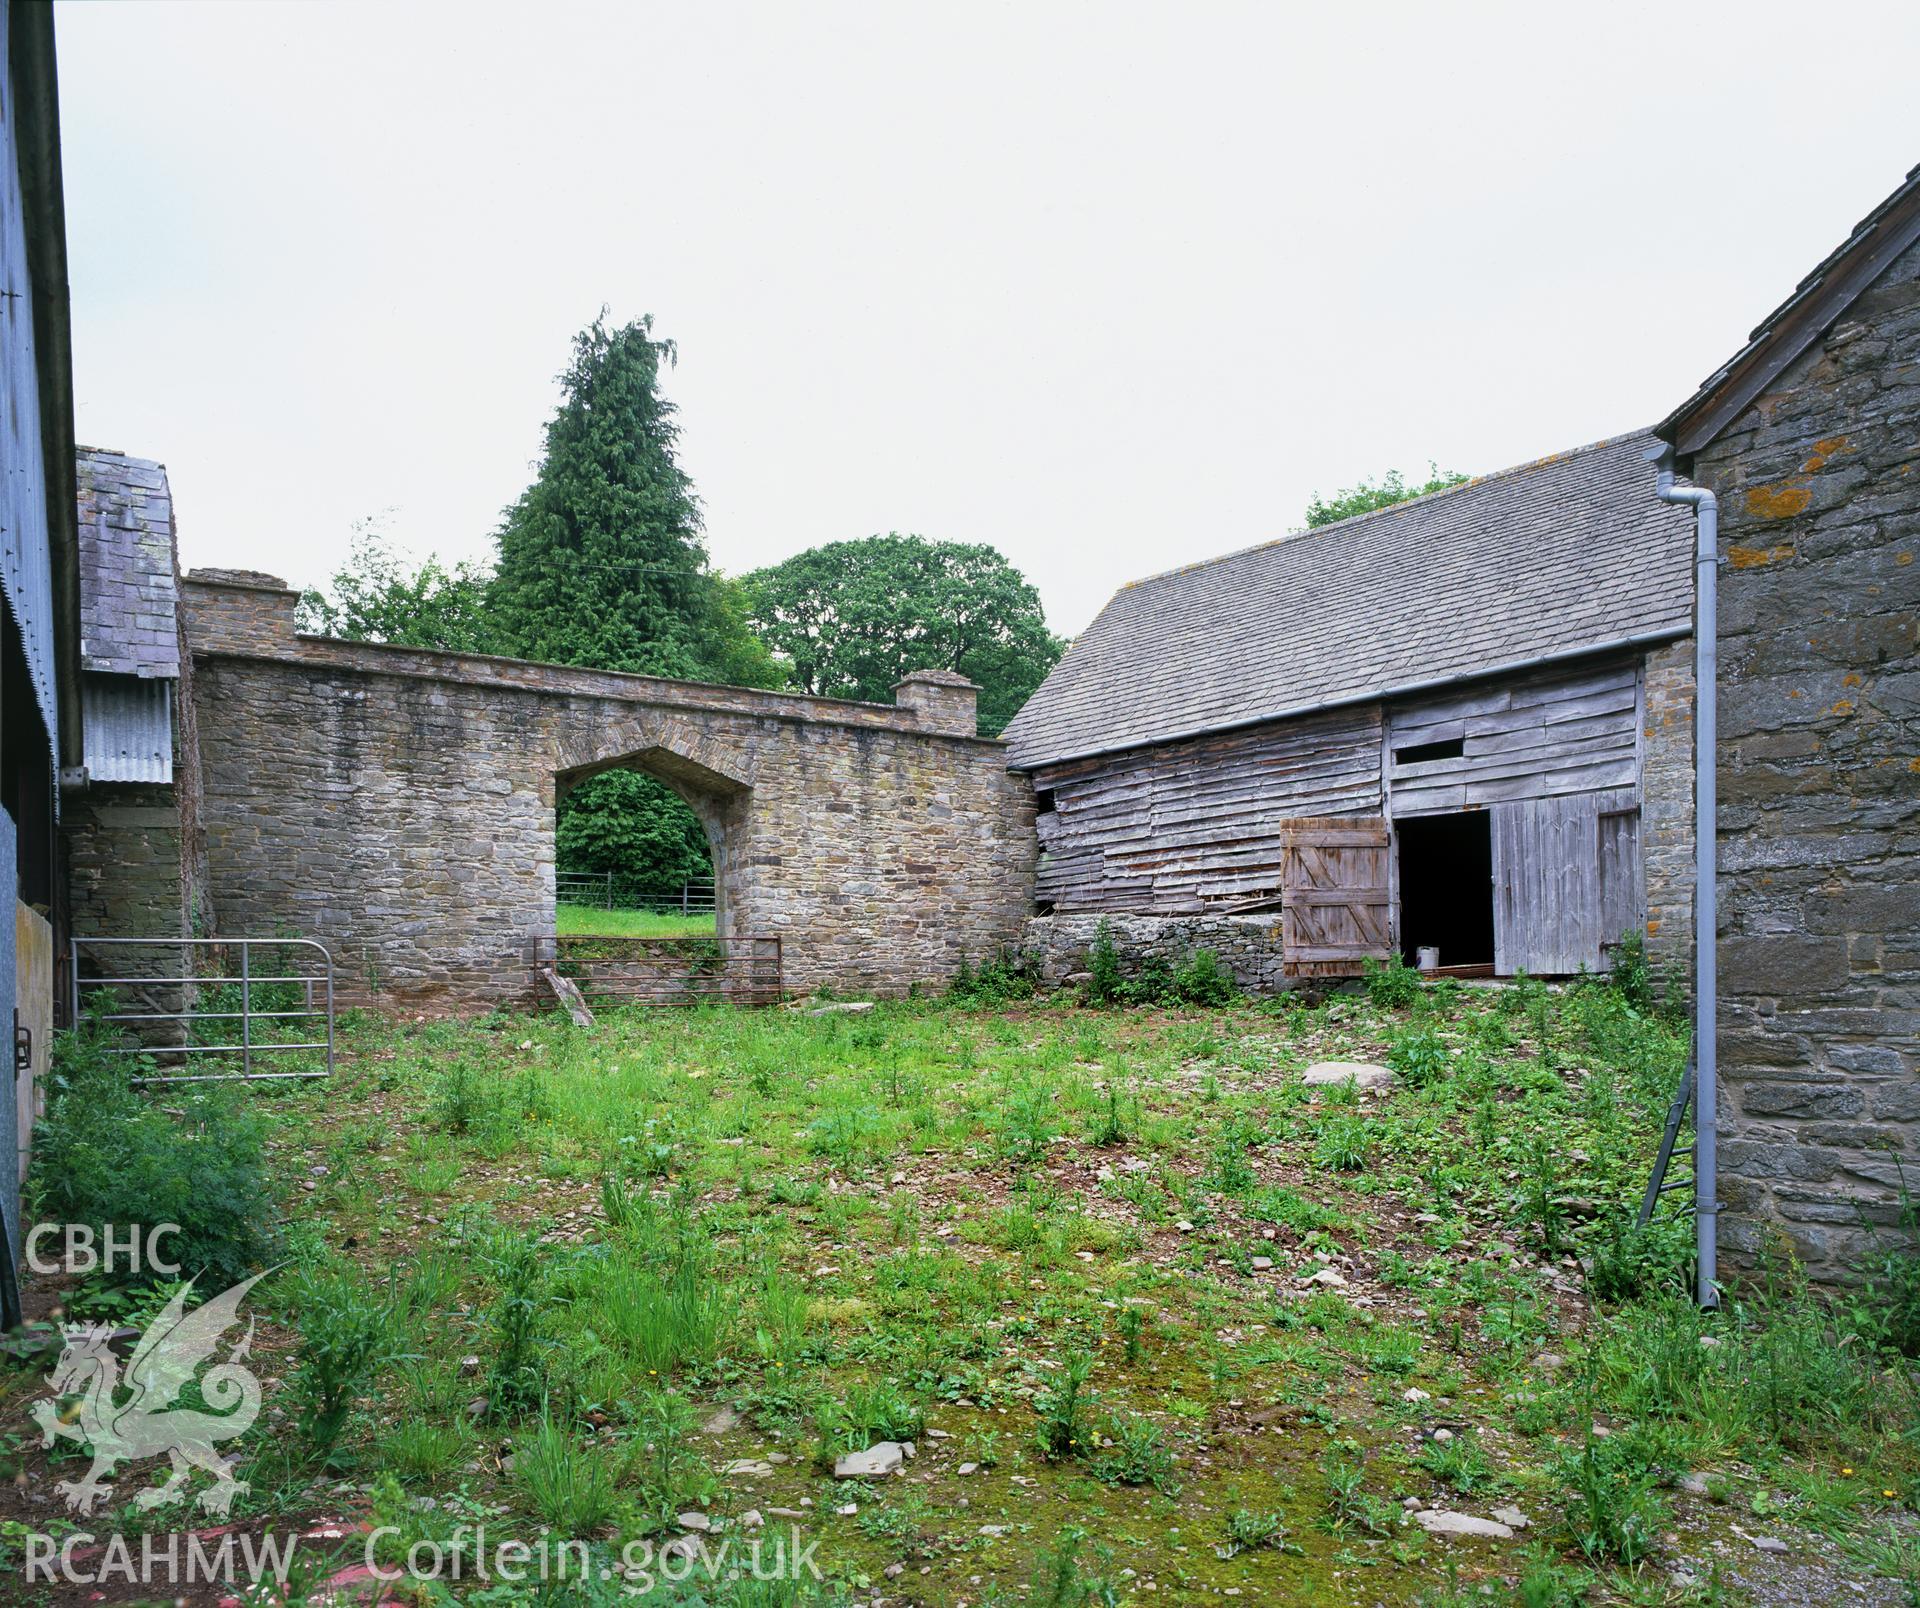 RCAHMW colour transparency showing a general view of the gateway and barn at Clyro Court Farm, taken by Fleur James, August 2003